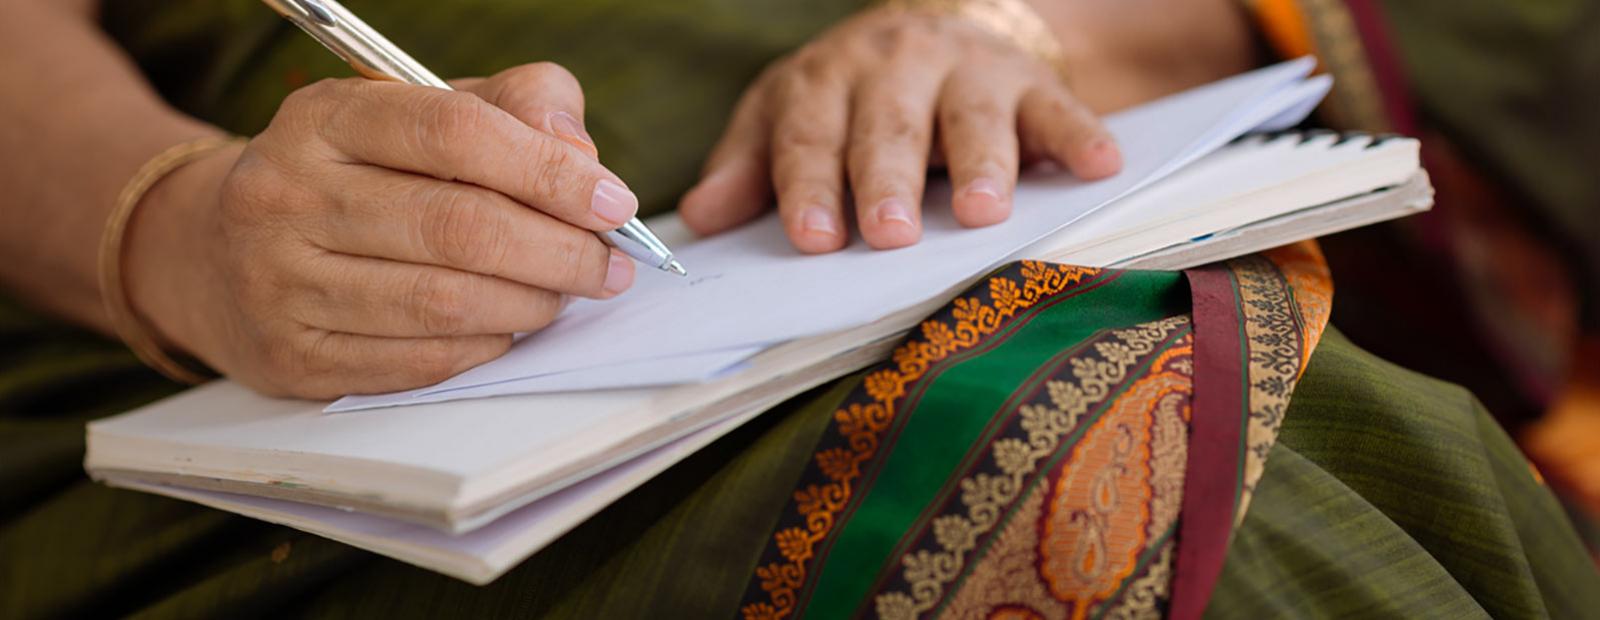 Person writing in a journal or notebook